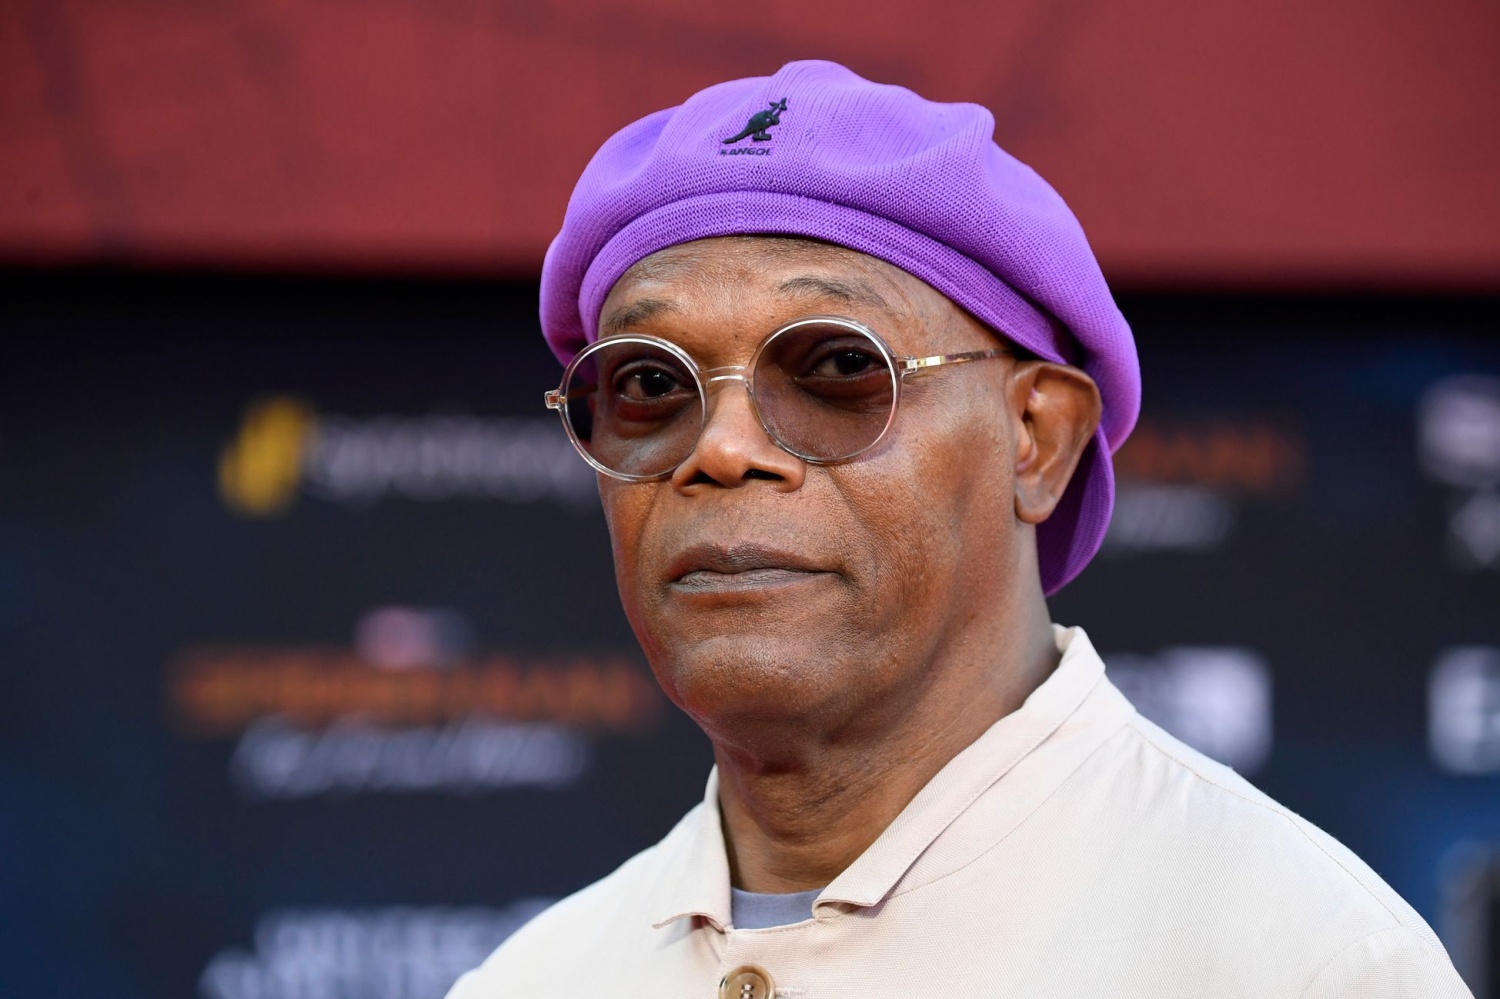 Samuel L. Jackson attends the Premiere Of Sony Pictures' "Spider-Man Far From Home" at TCL Chinese Theatre on June 26, 2019 in Hollywood, California. (Photo by Frazer Harrison/Getty Images)